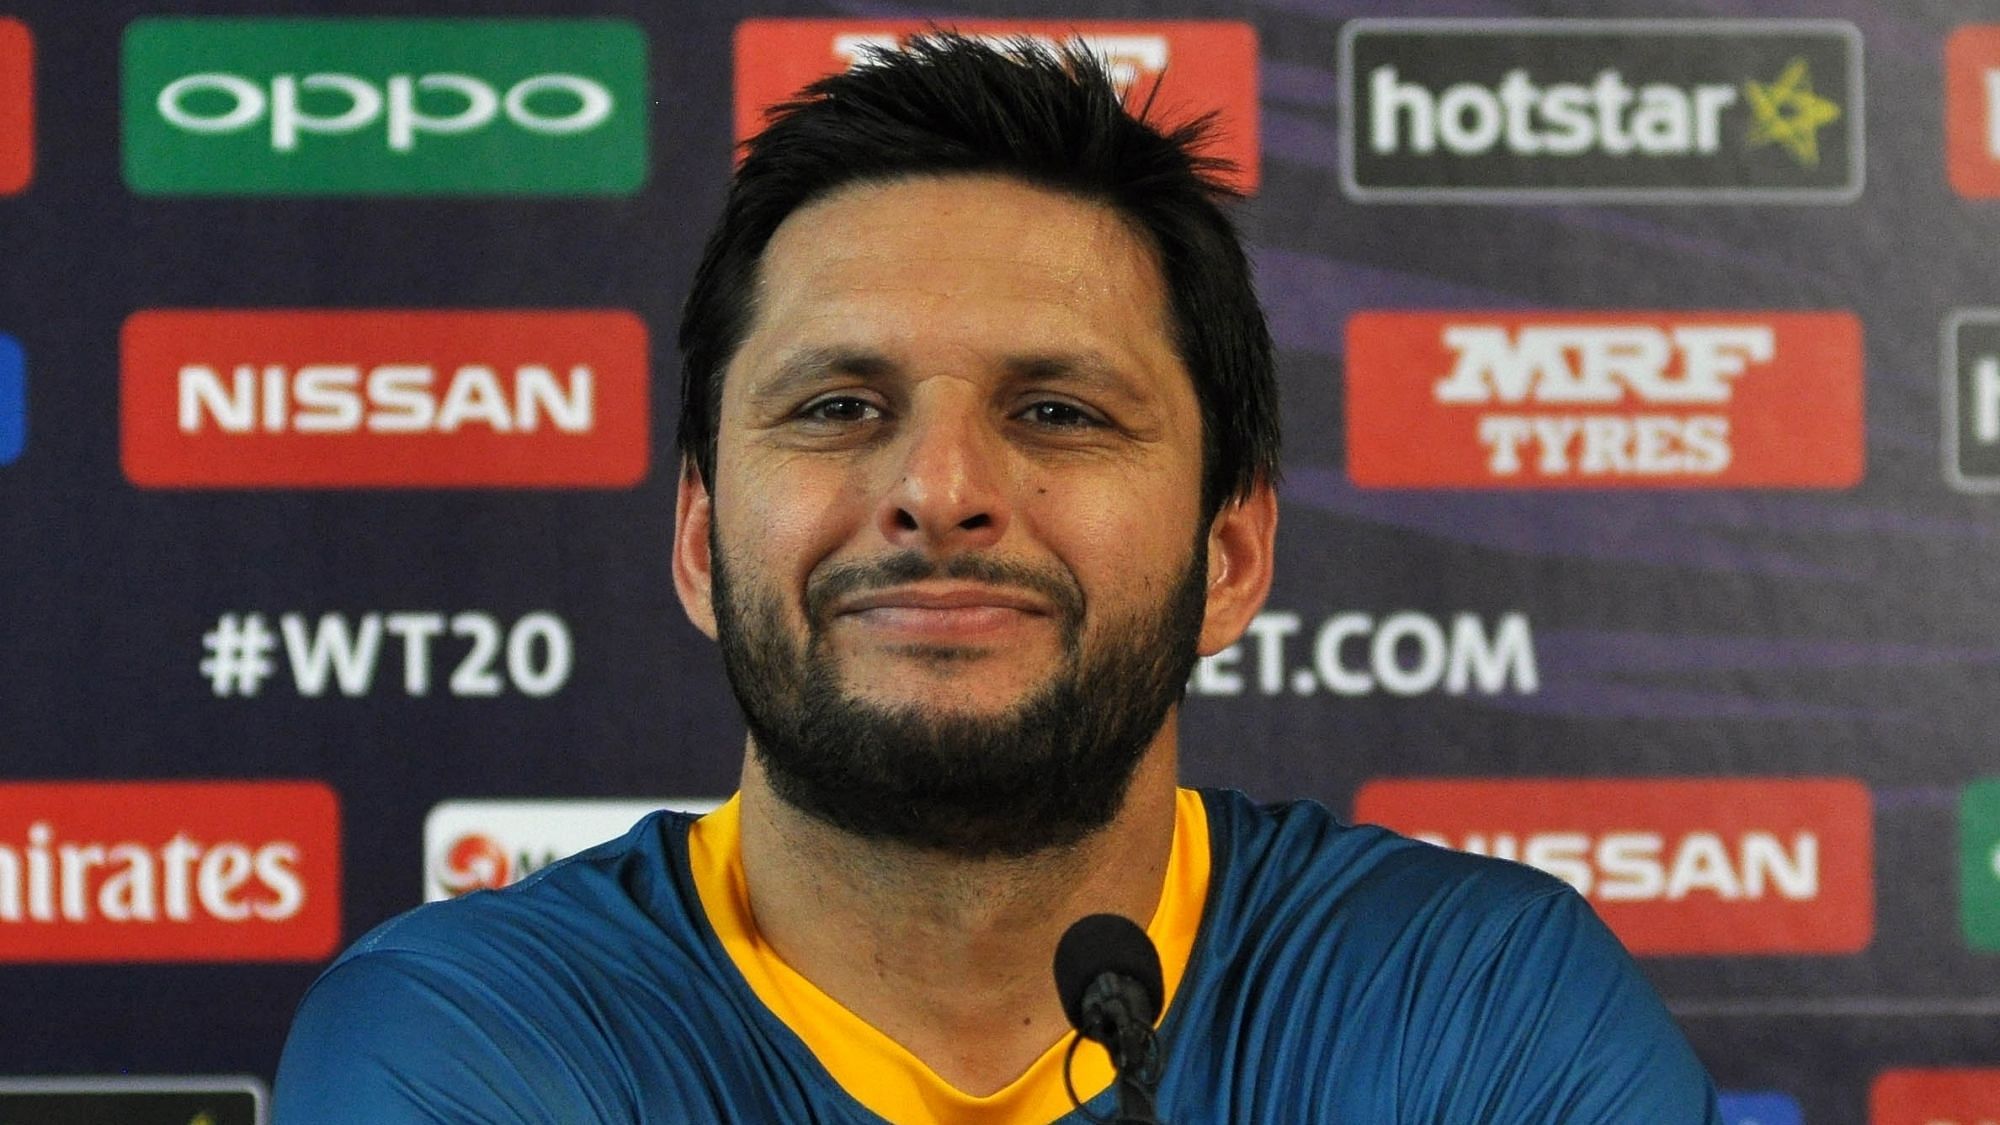 Shahid Afridi said that while he has always had a problem with Gautam Gambhir as a human being,